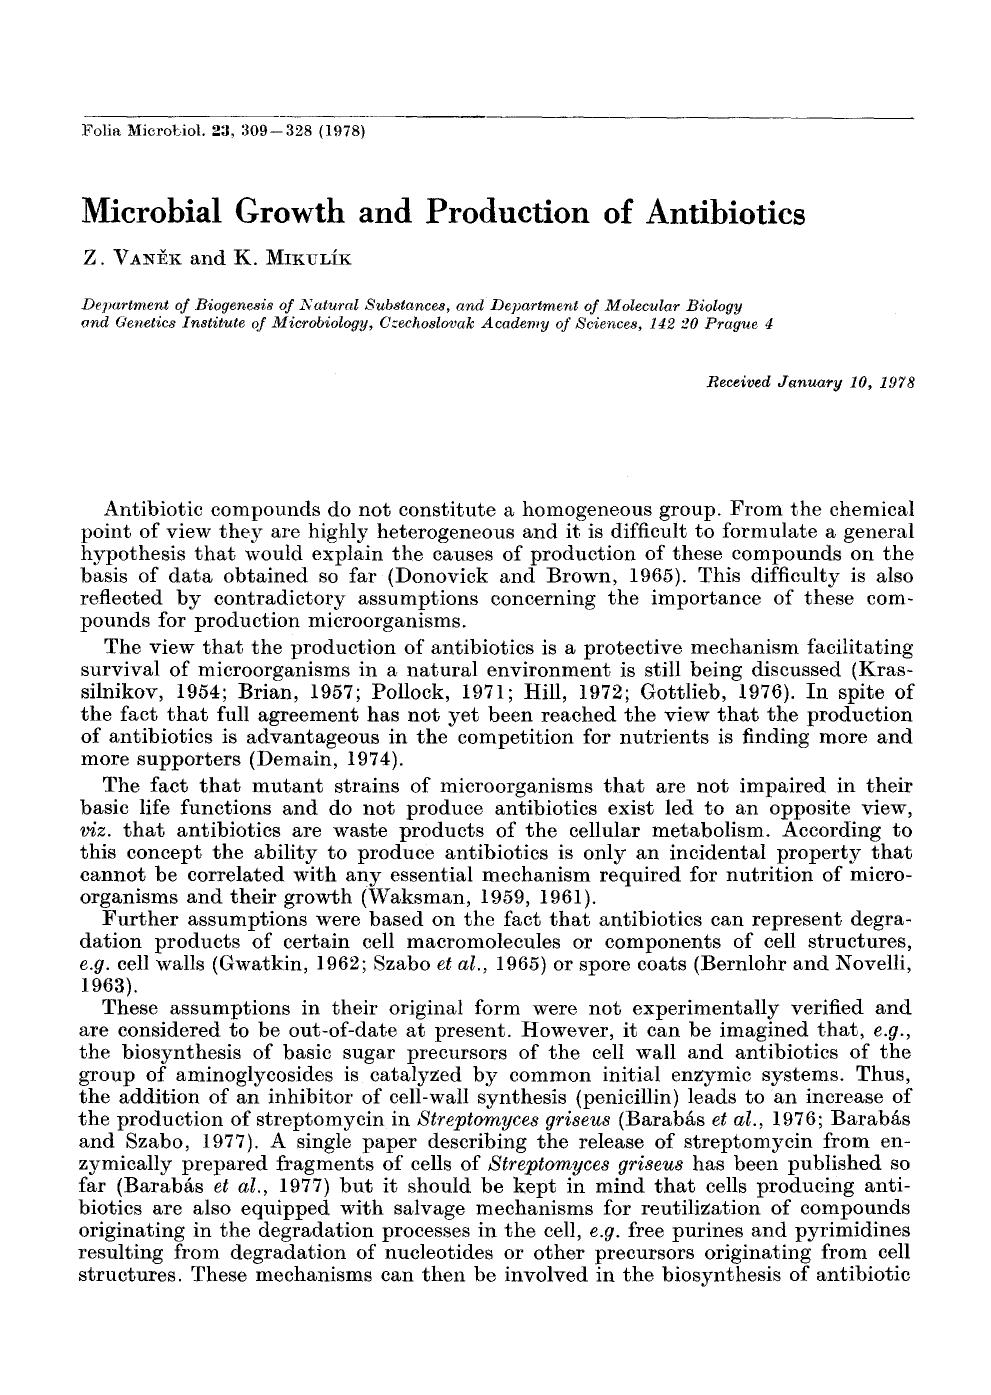 Microbial growth and production of antibiotics by Unknown